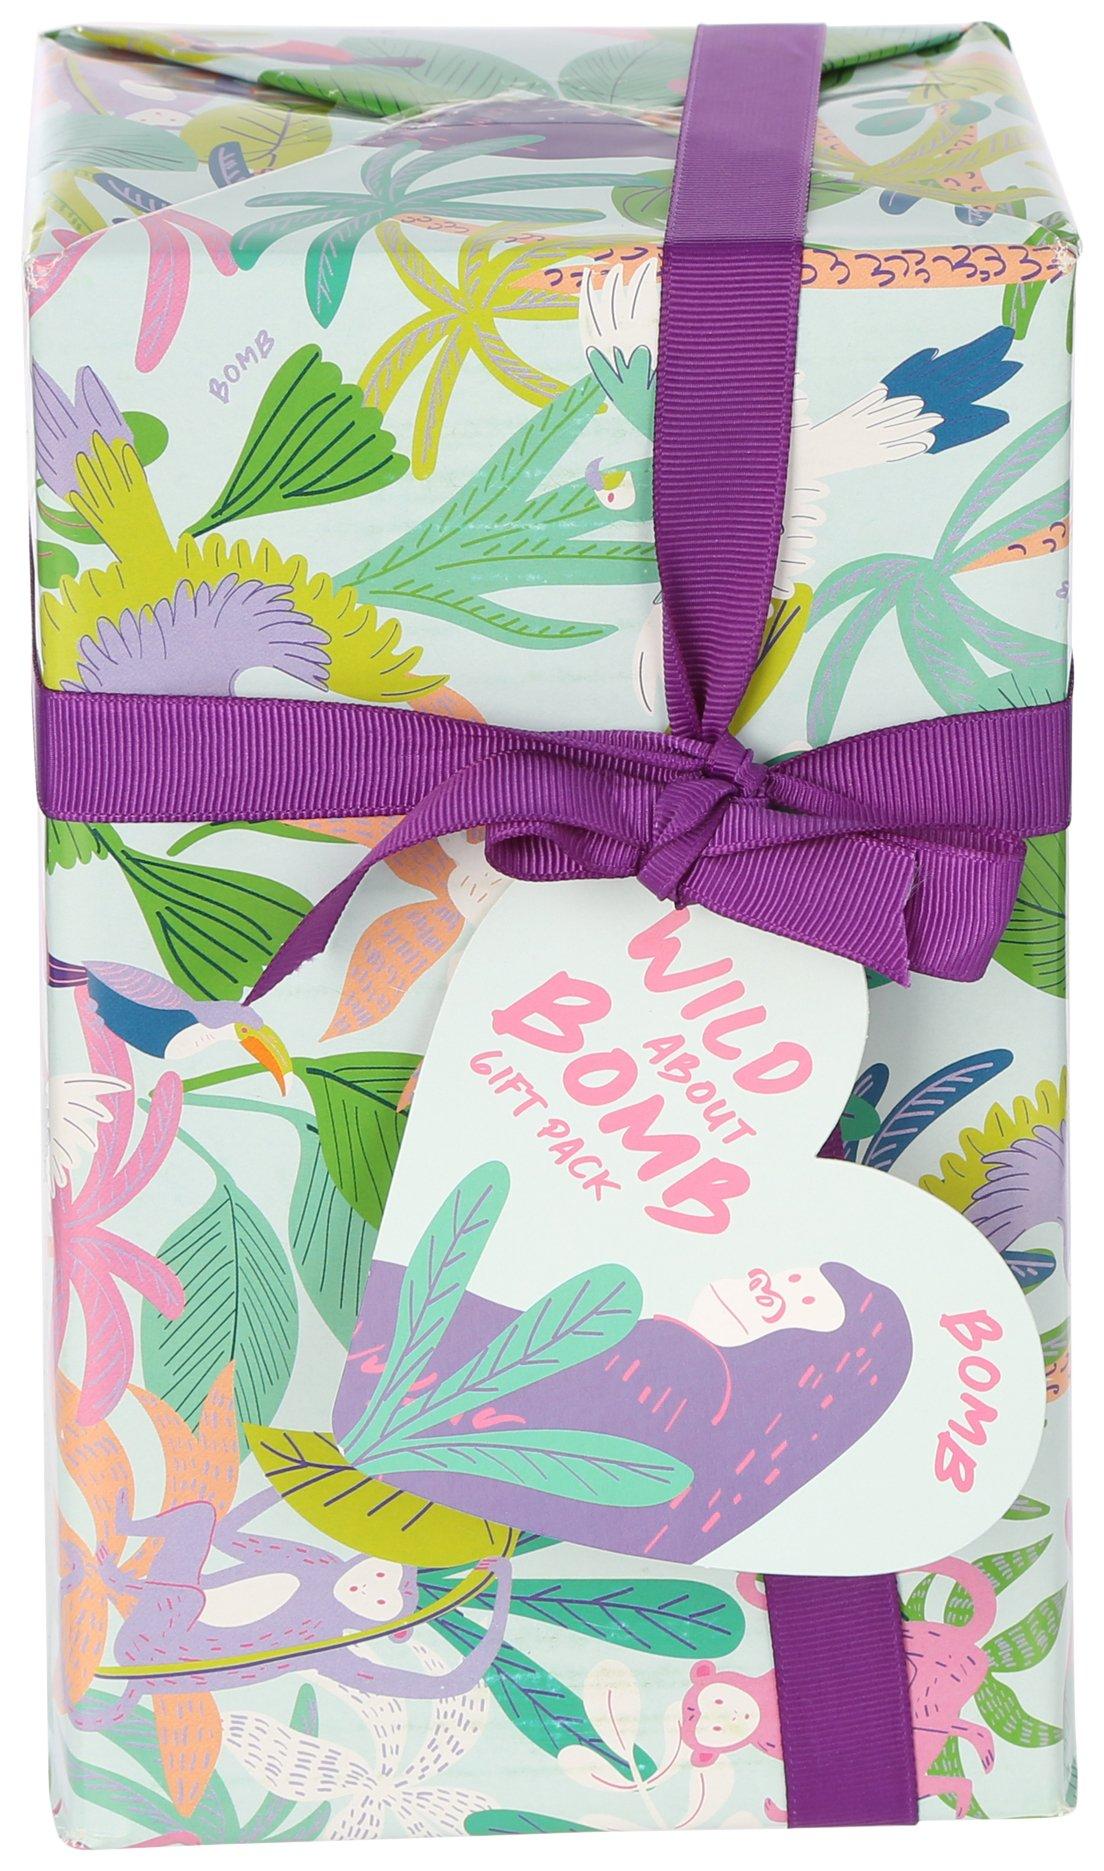 5 Pc. Wild About Bomb Handmade Gift Pack